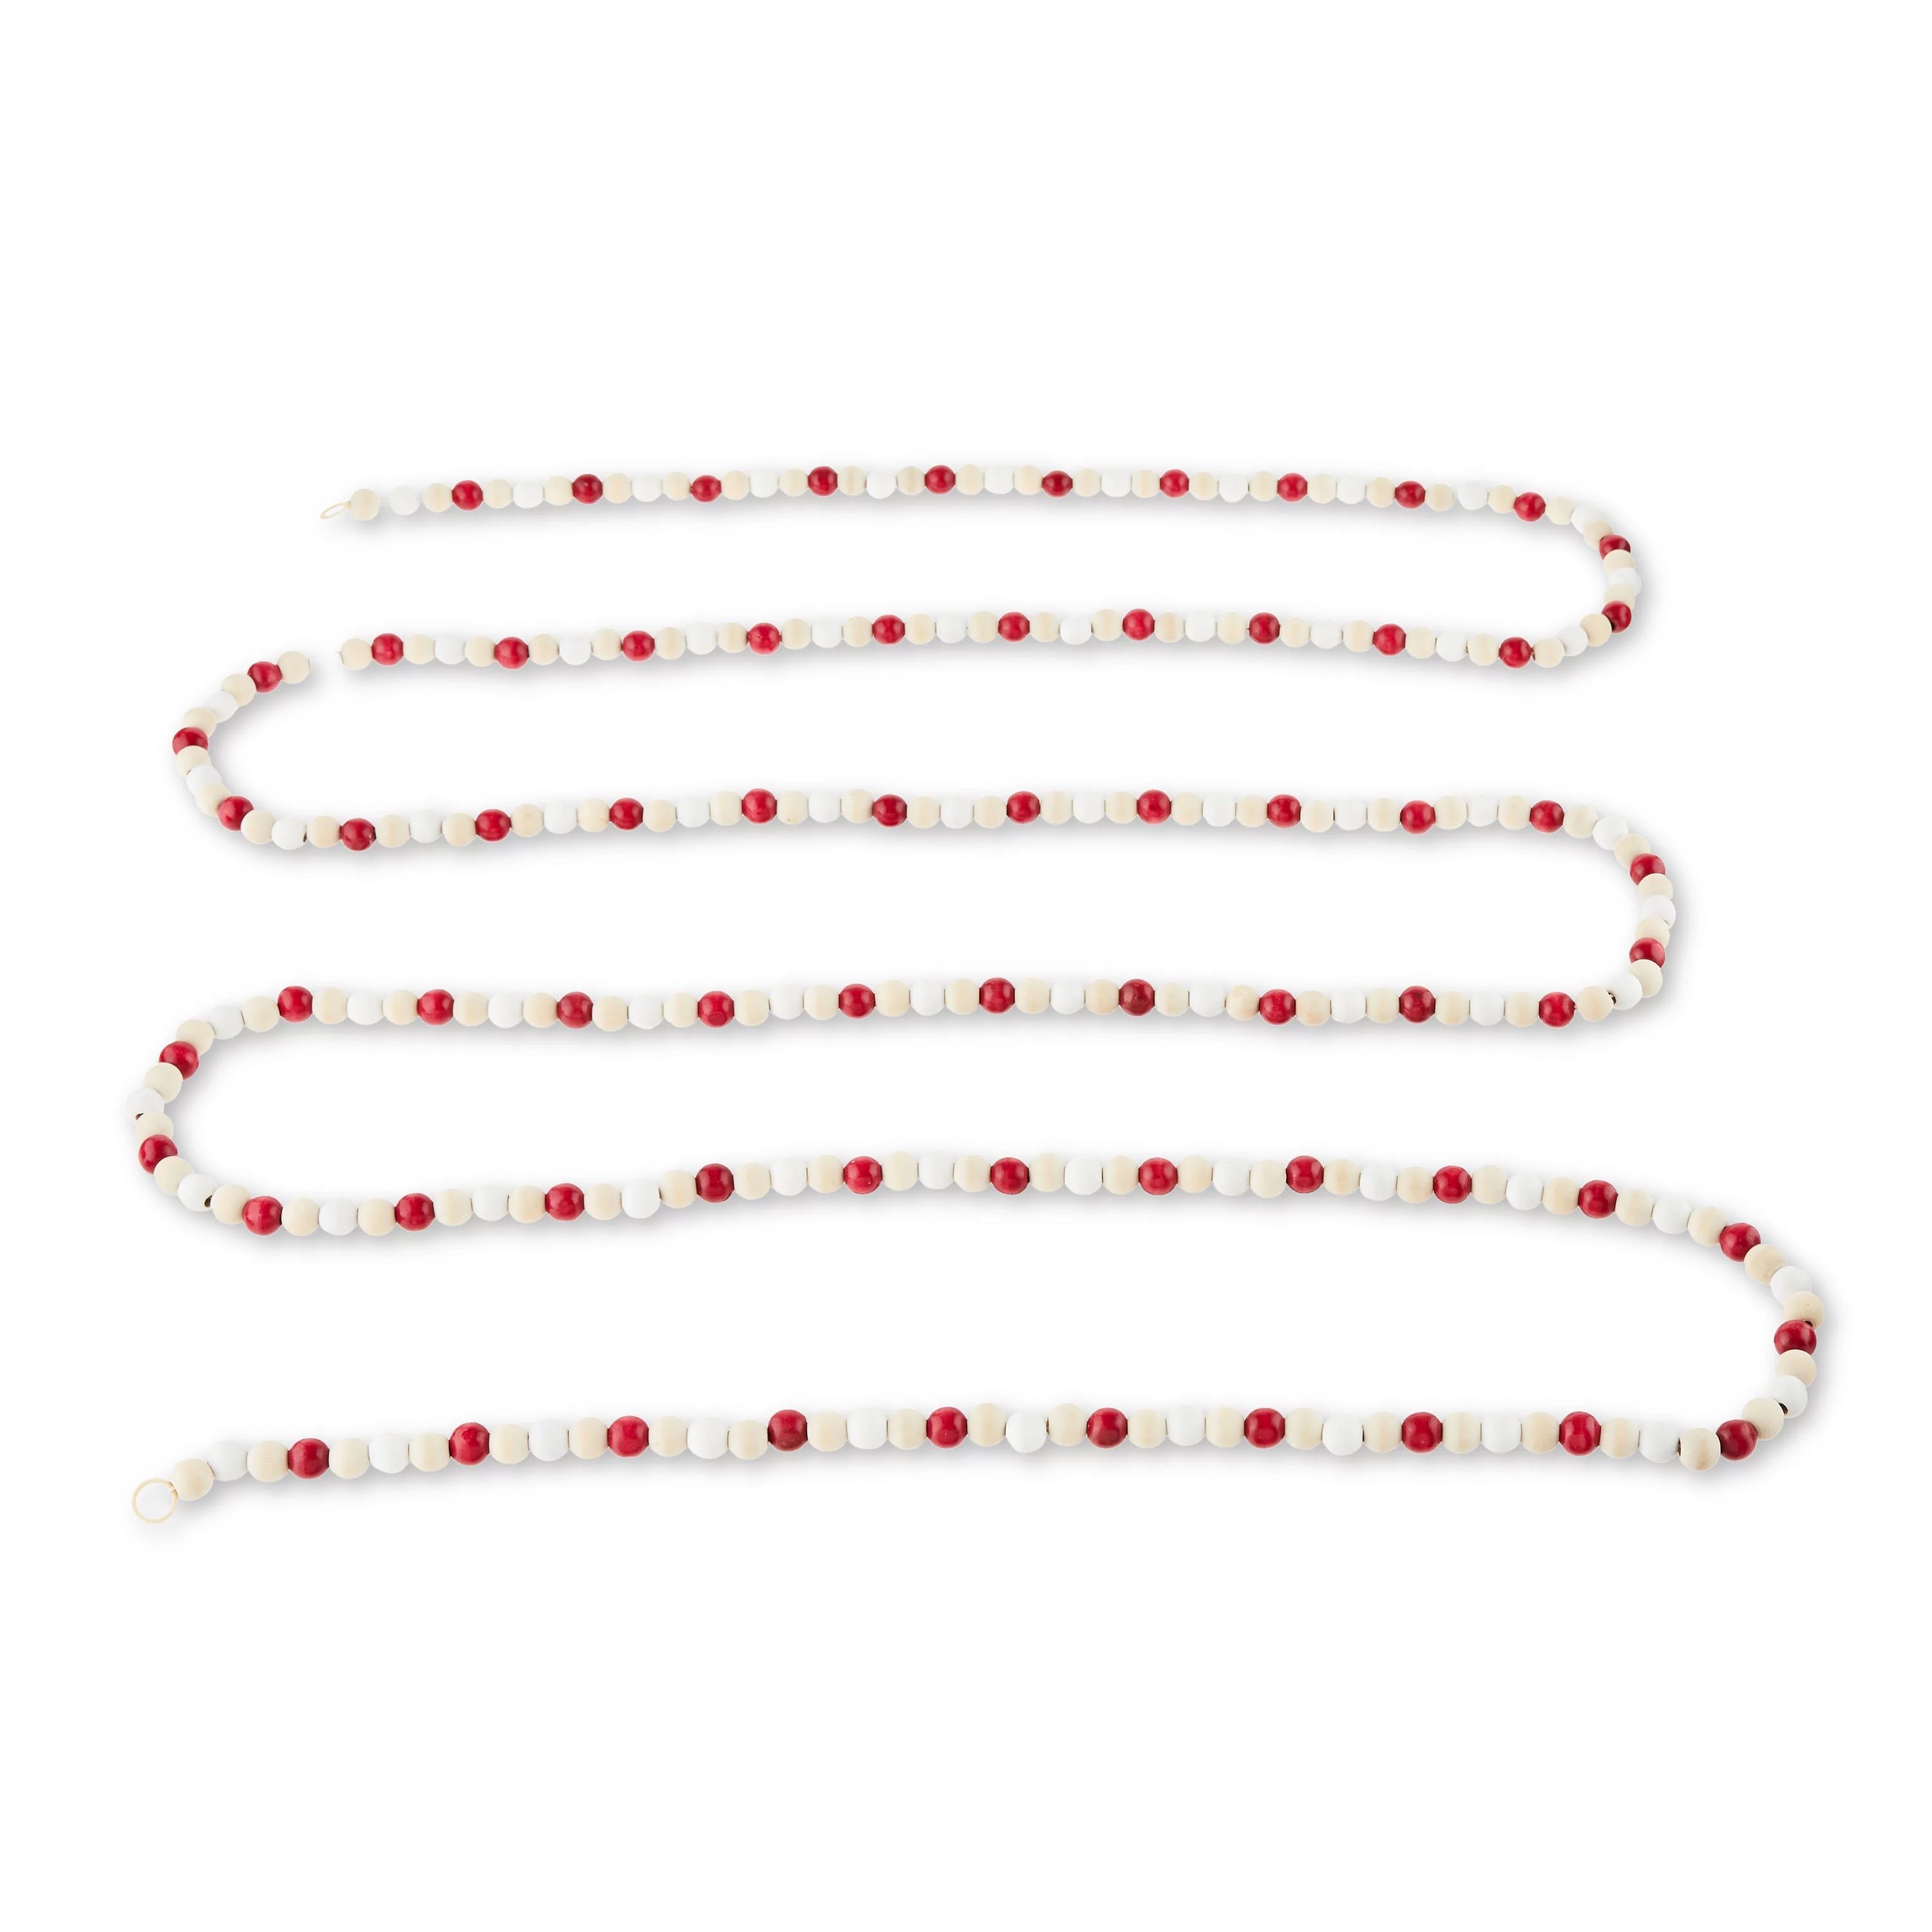 Red, White & Natural Wood Bead Christmas Garland, 12', by Holiday Time | Walmart (US)